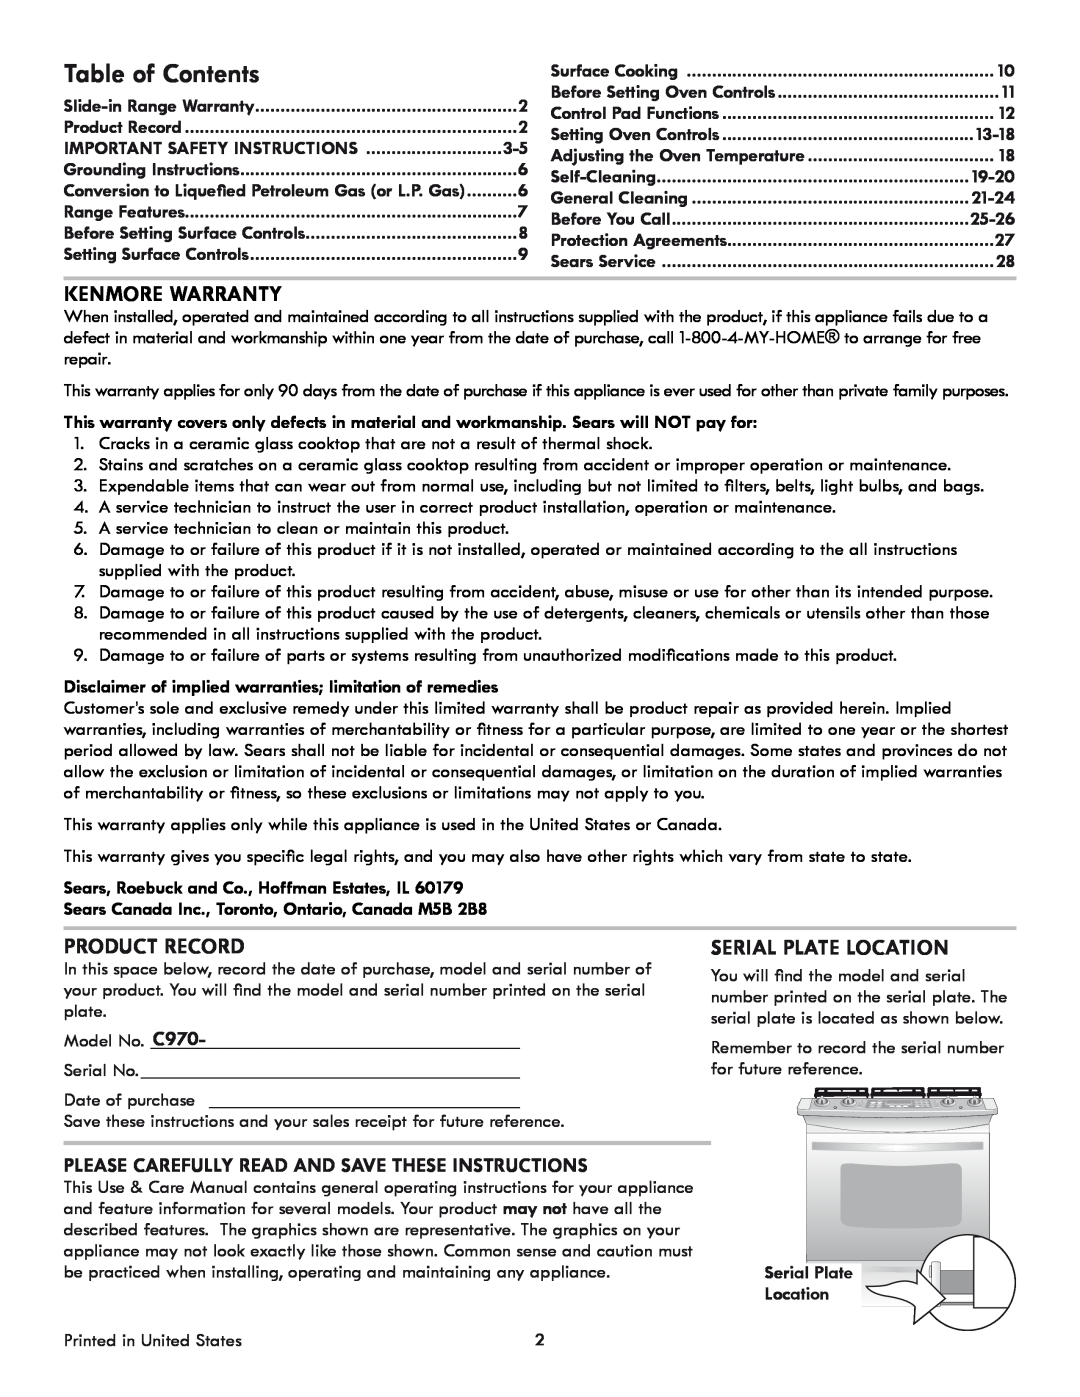 Kenmore 318205869A manual Table of Contents, Kenmore Warranty, Product Record, Serial Plate Location 